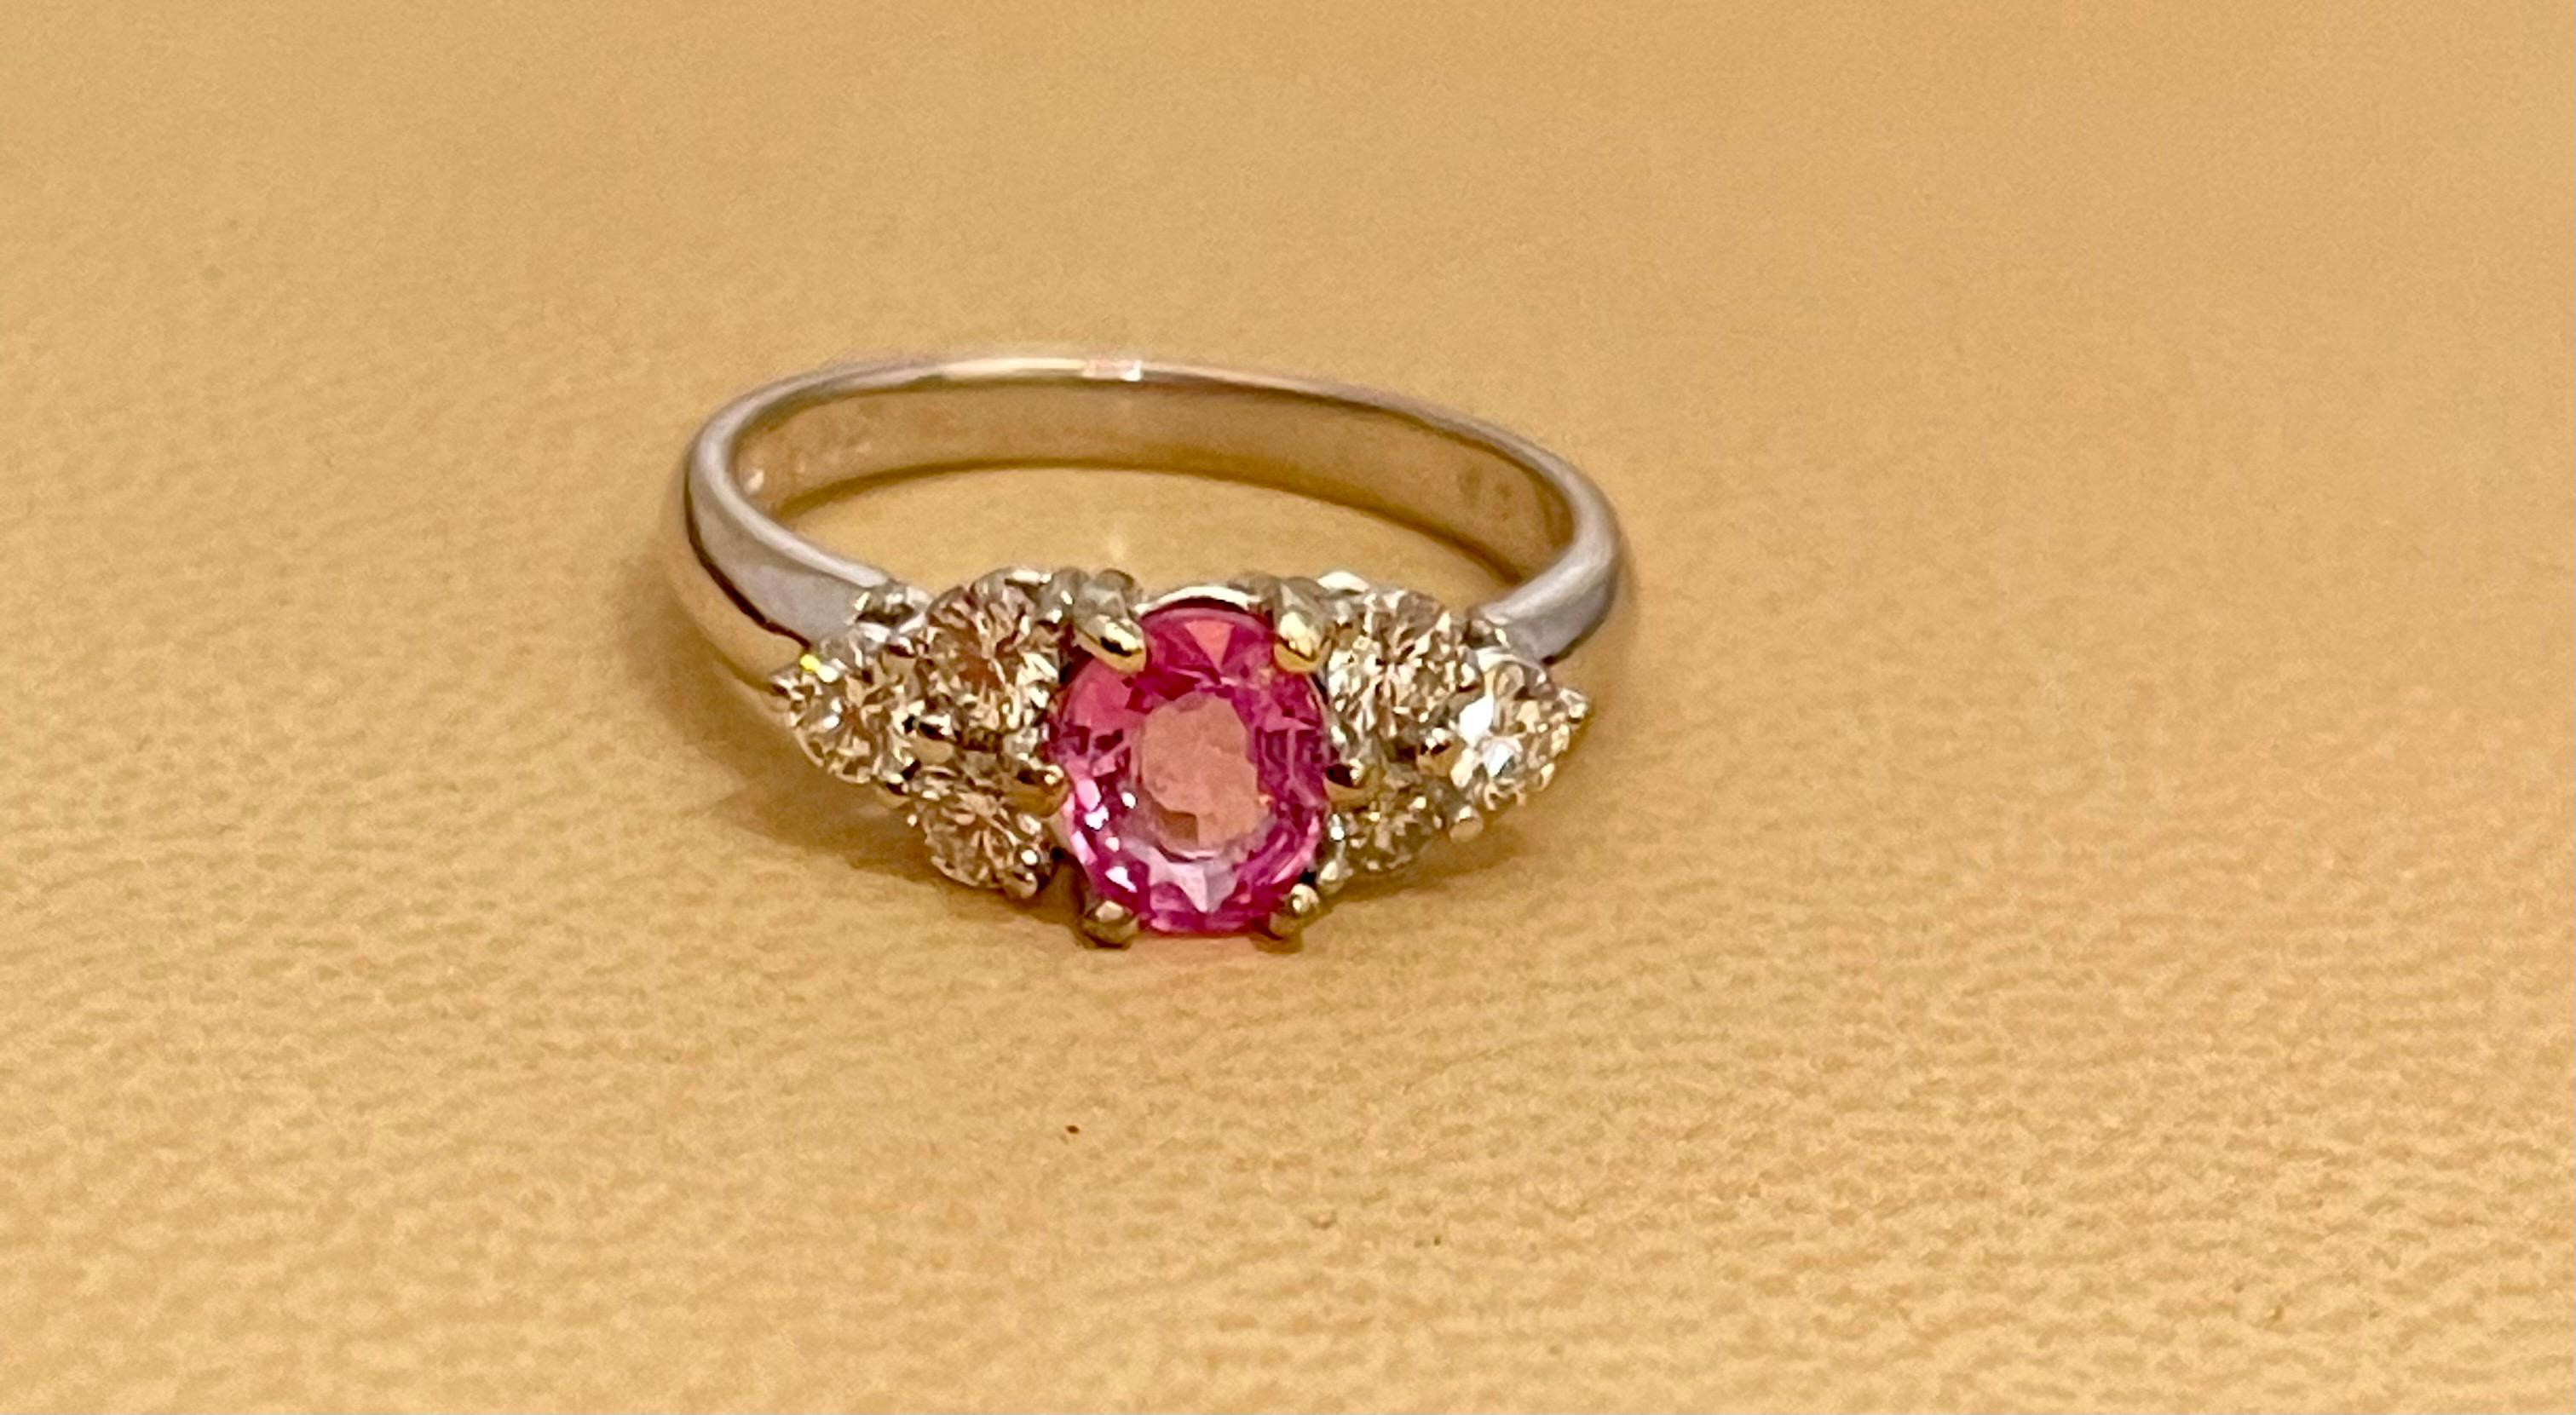 A classic, Ring 
0.75 Ct Oval Pink Sapphire & 0.50  Ct Diamond Ring in 18 Karat White gold.
Natural Pink Sapphire in Oval   shape , Pretty color, luster is amazing and  have very little inclusions .
There are brilliant cut diamonds around the pink